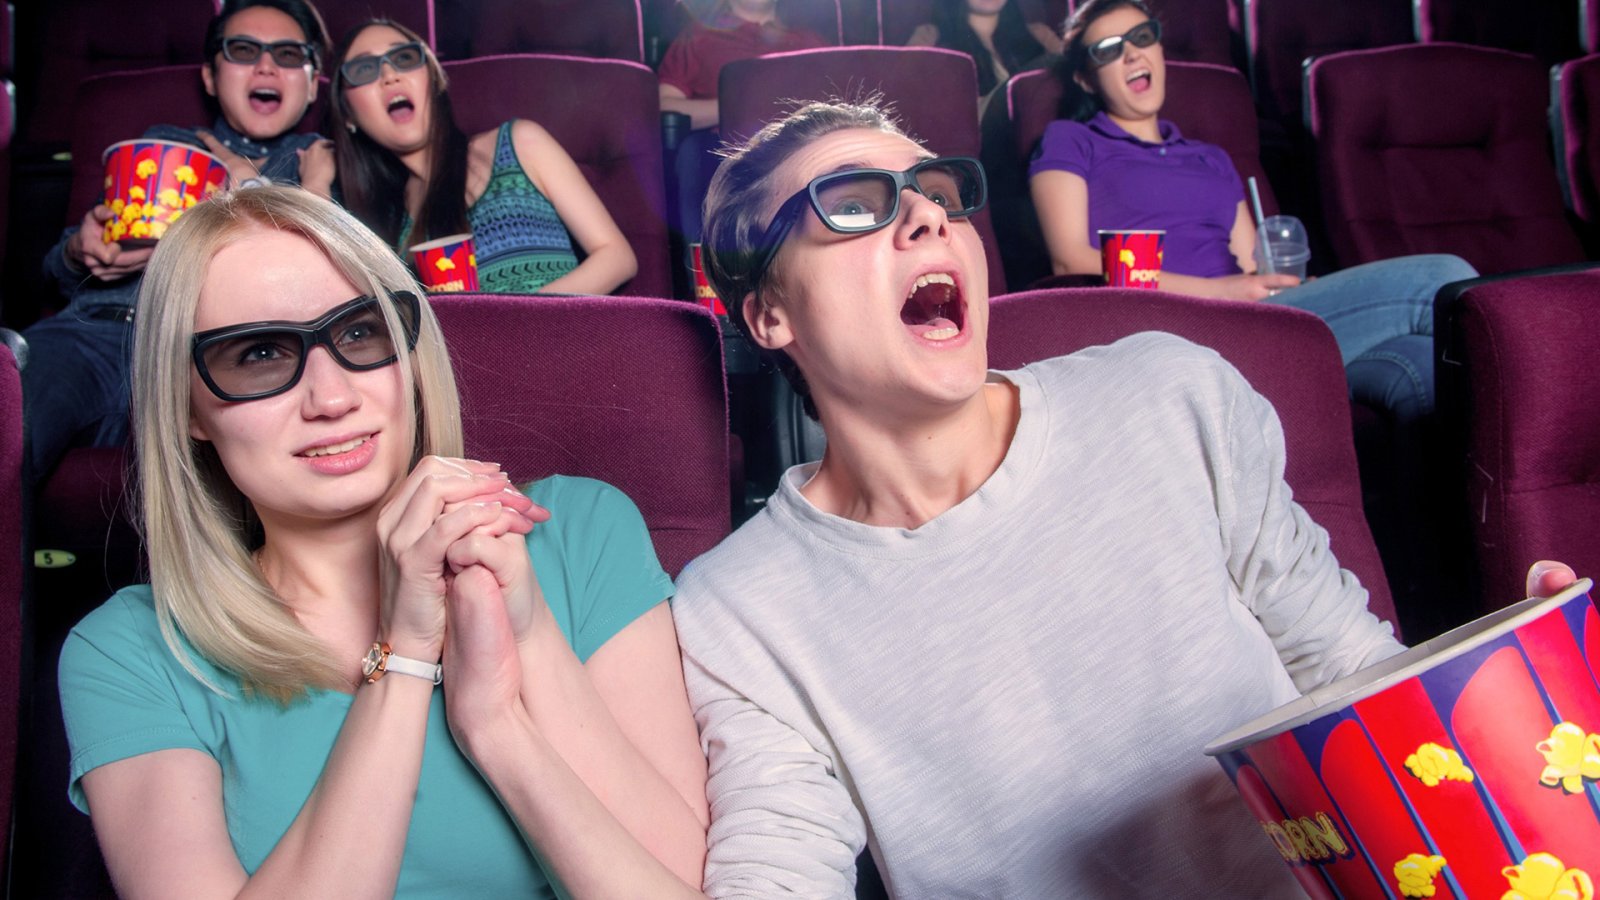 An inside look at 4DX cinema: behind motion-enabled movie theaters